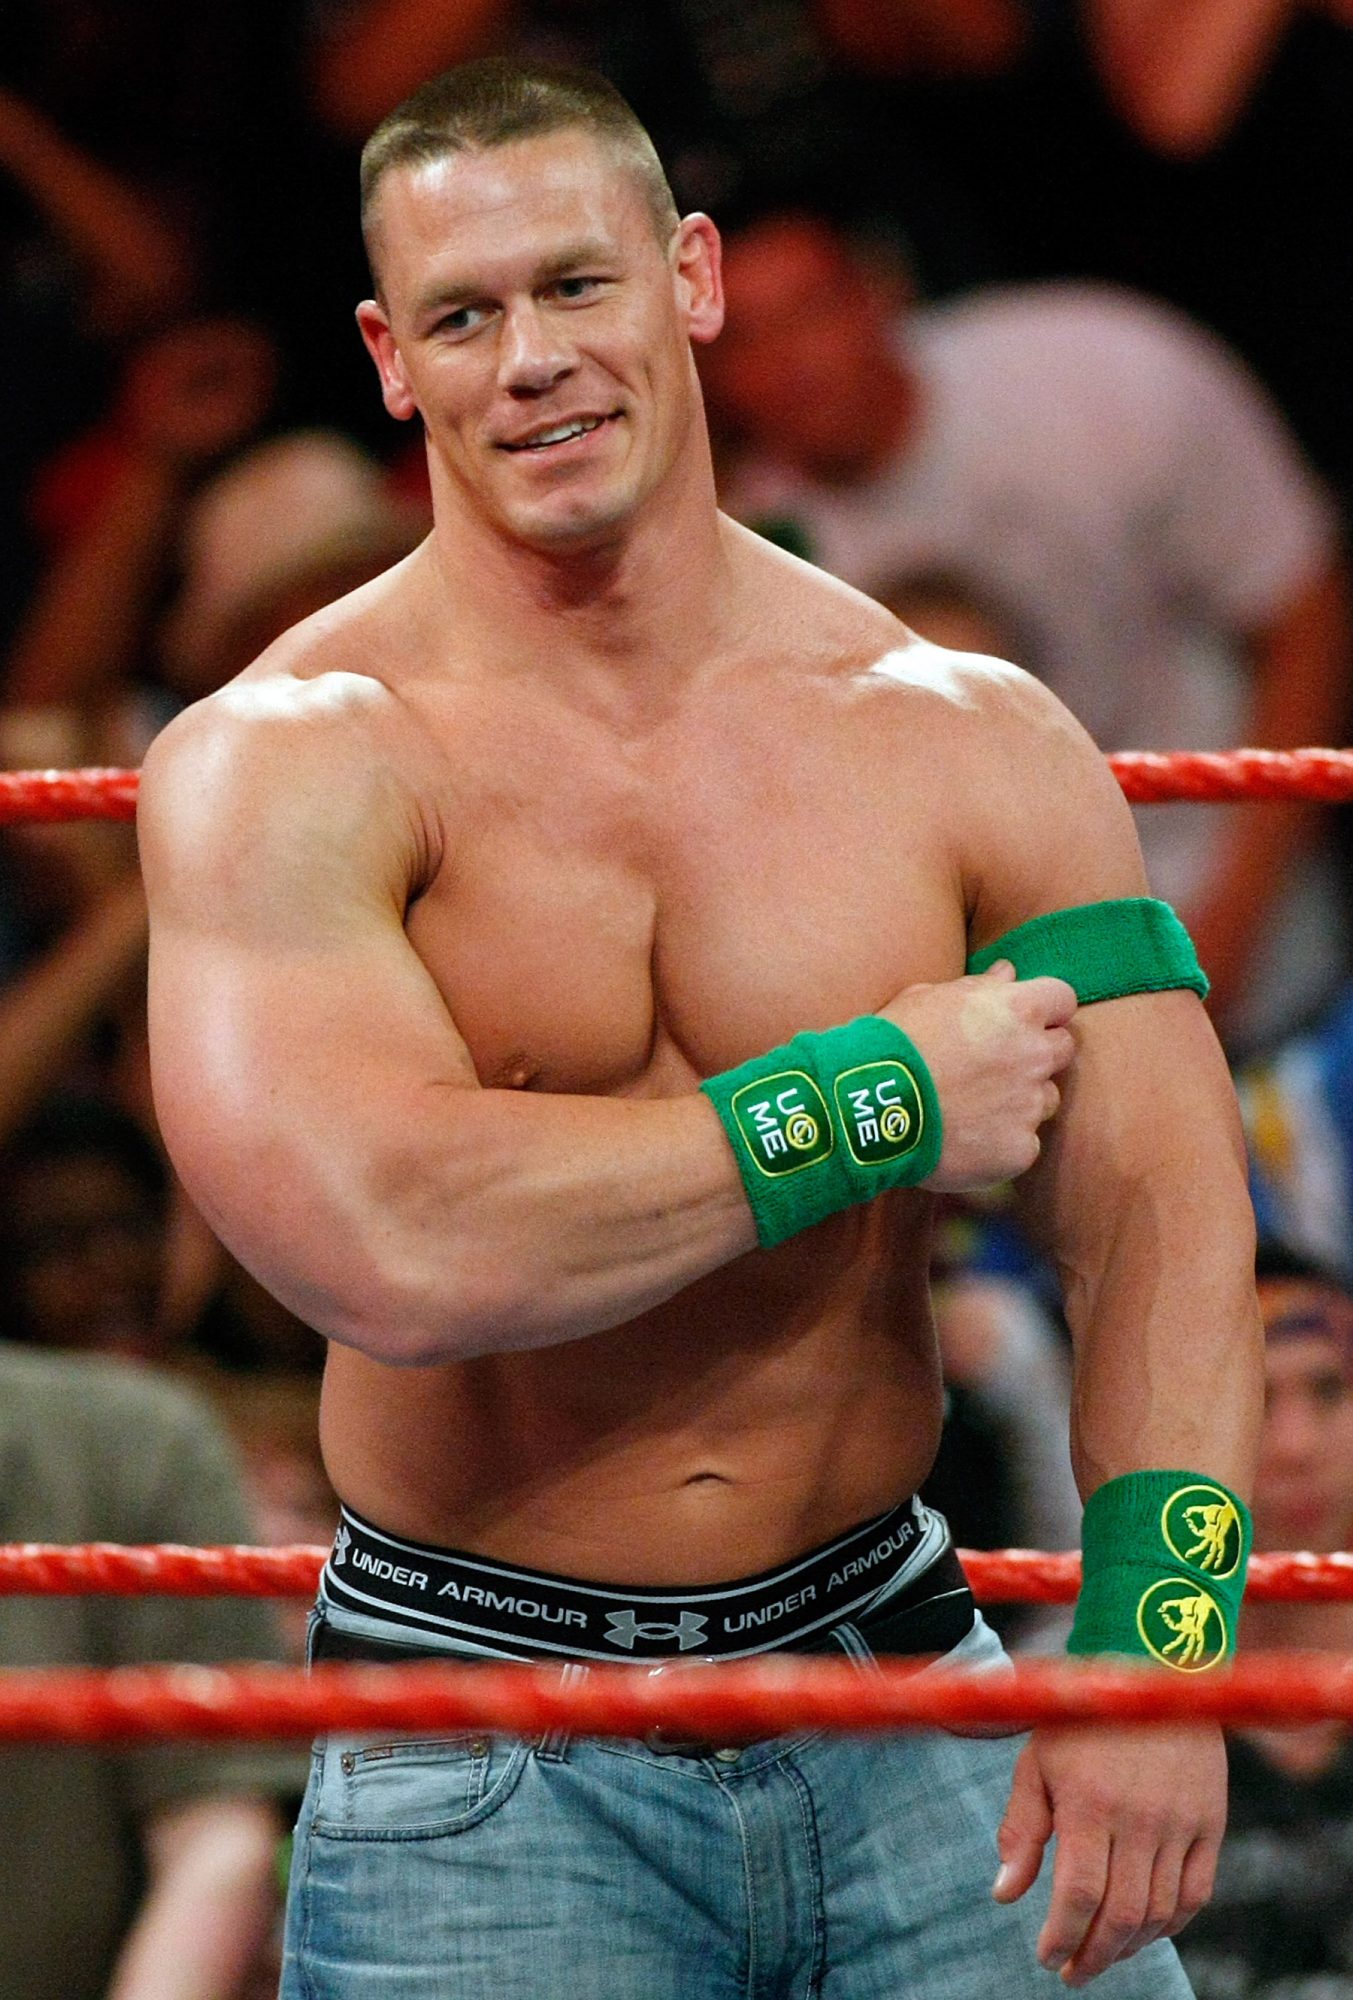 John Cena Used to Eat '000 Calories' of Tic Tacs in WWE